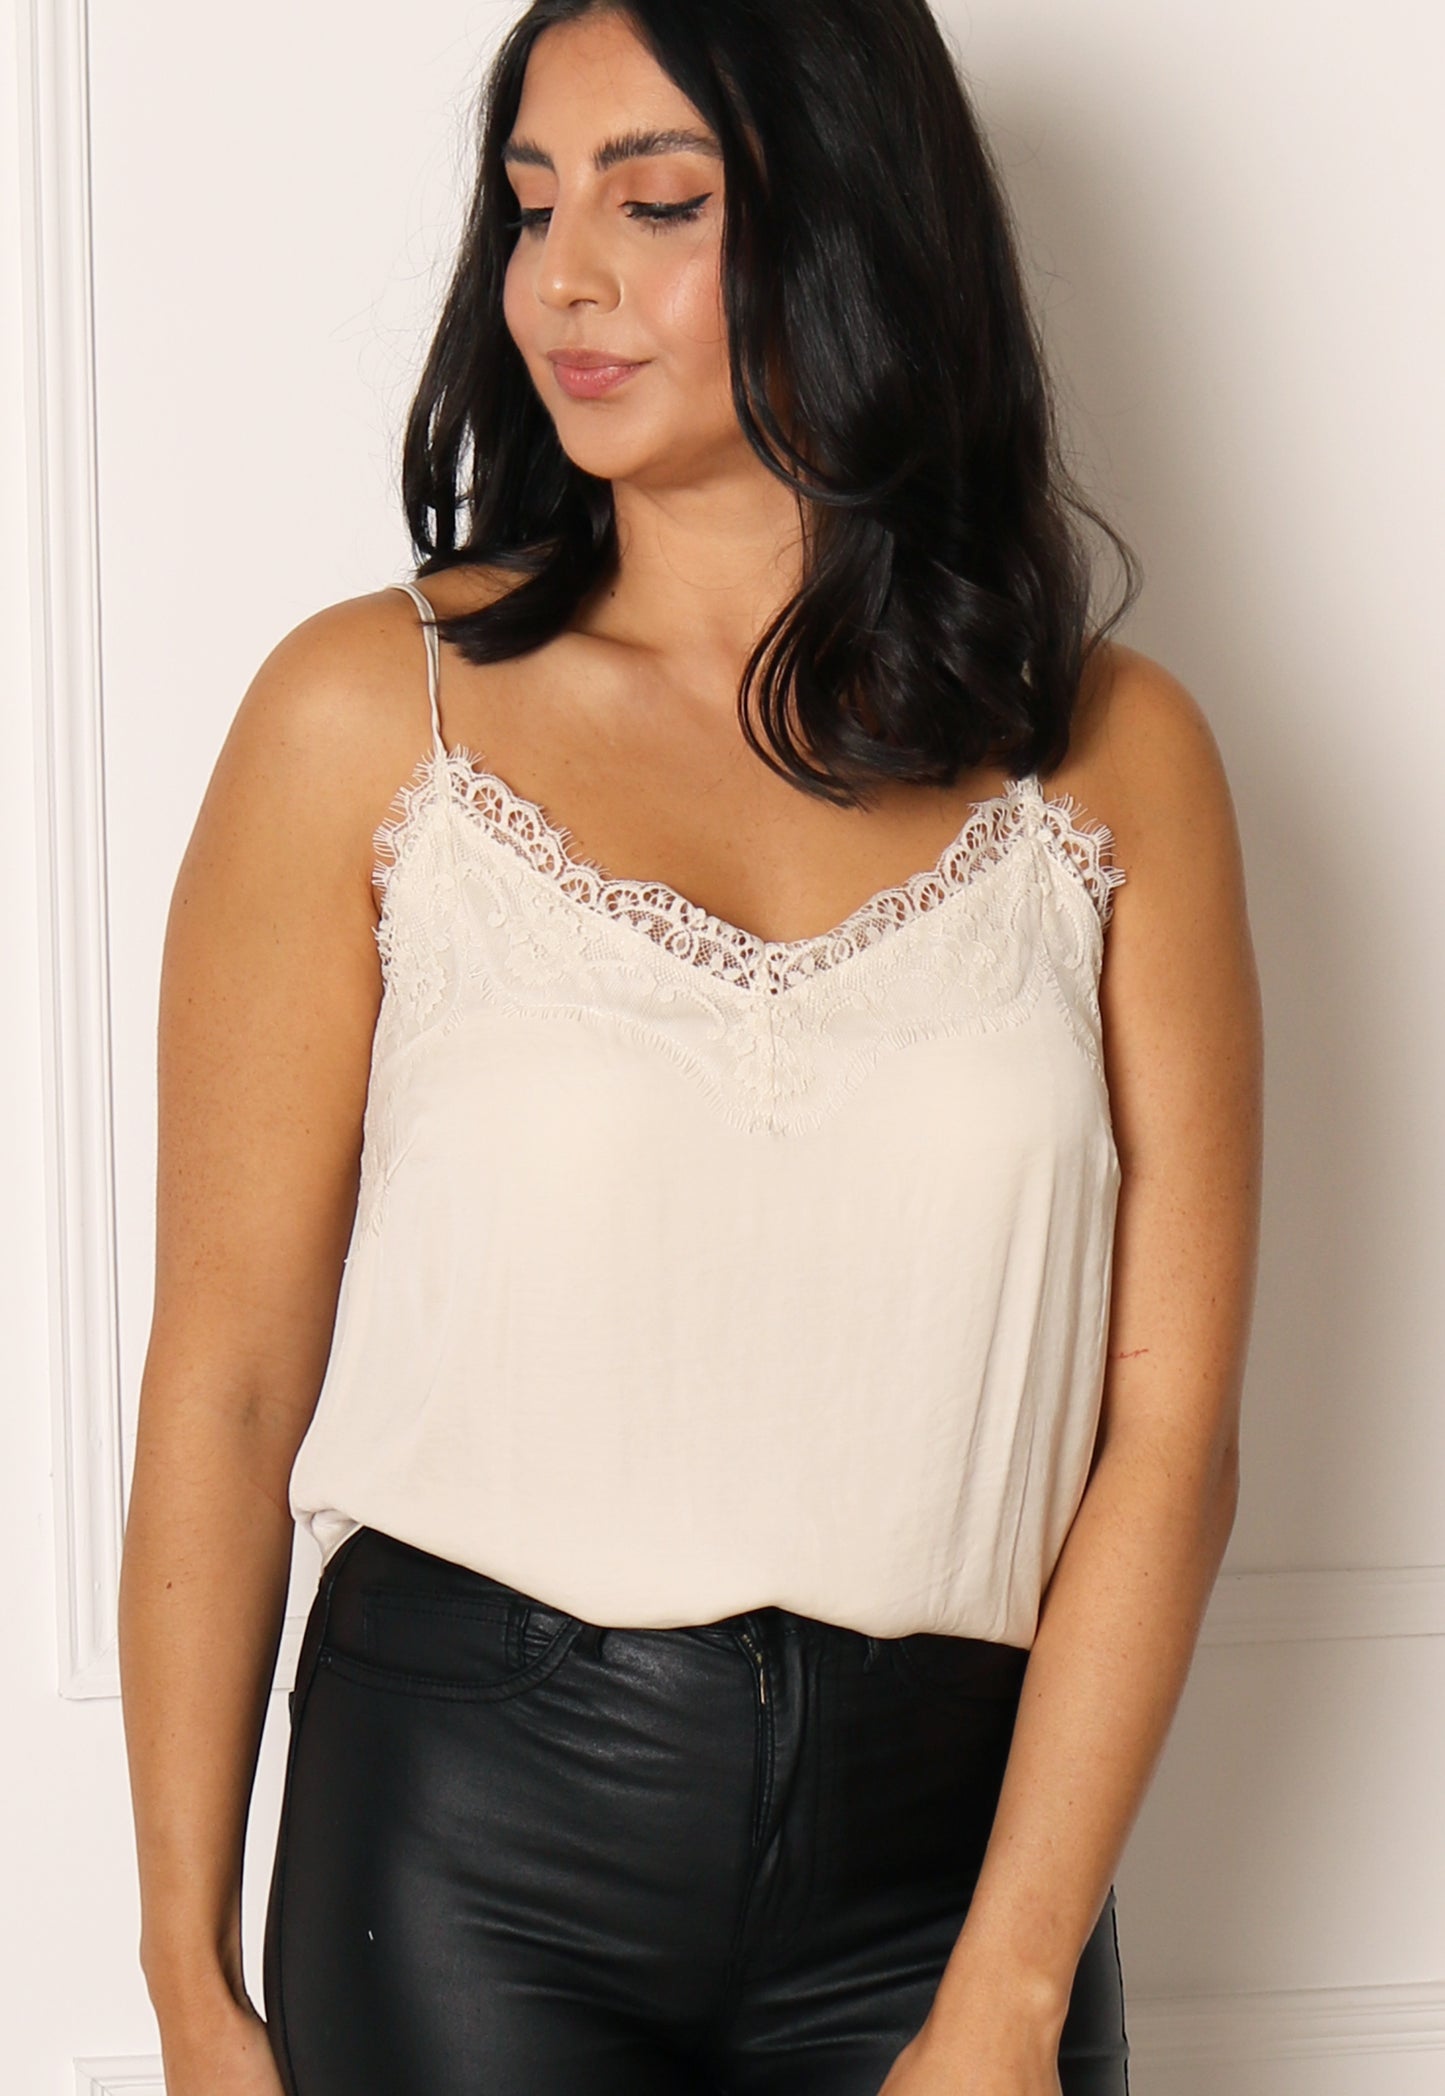 
                  
                    VILA Cava Eyelash Lace Trimmed Satin Strappy Cami Vest Top in Cream - One Nation Clothing
                  
                